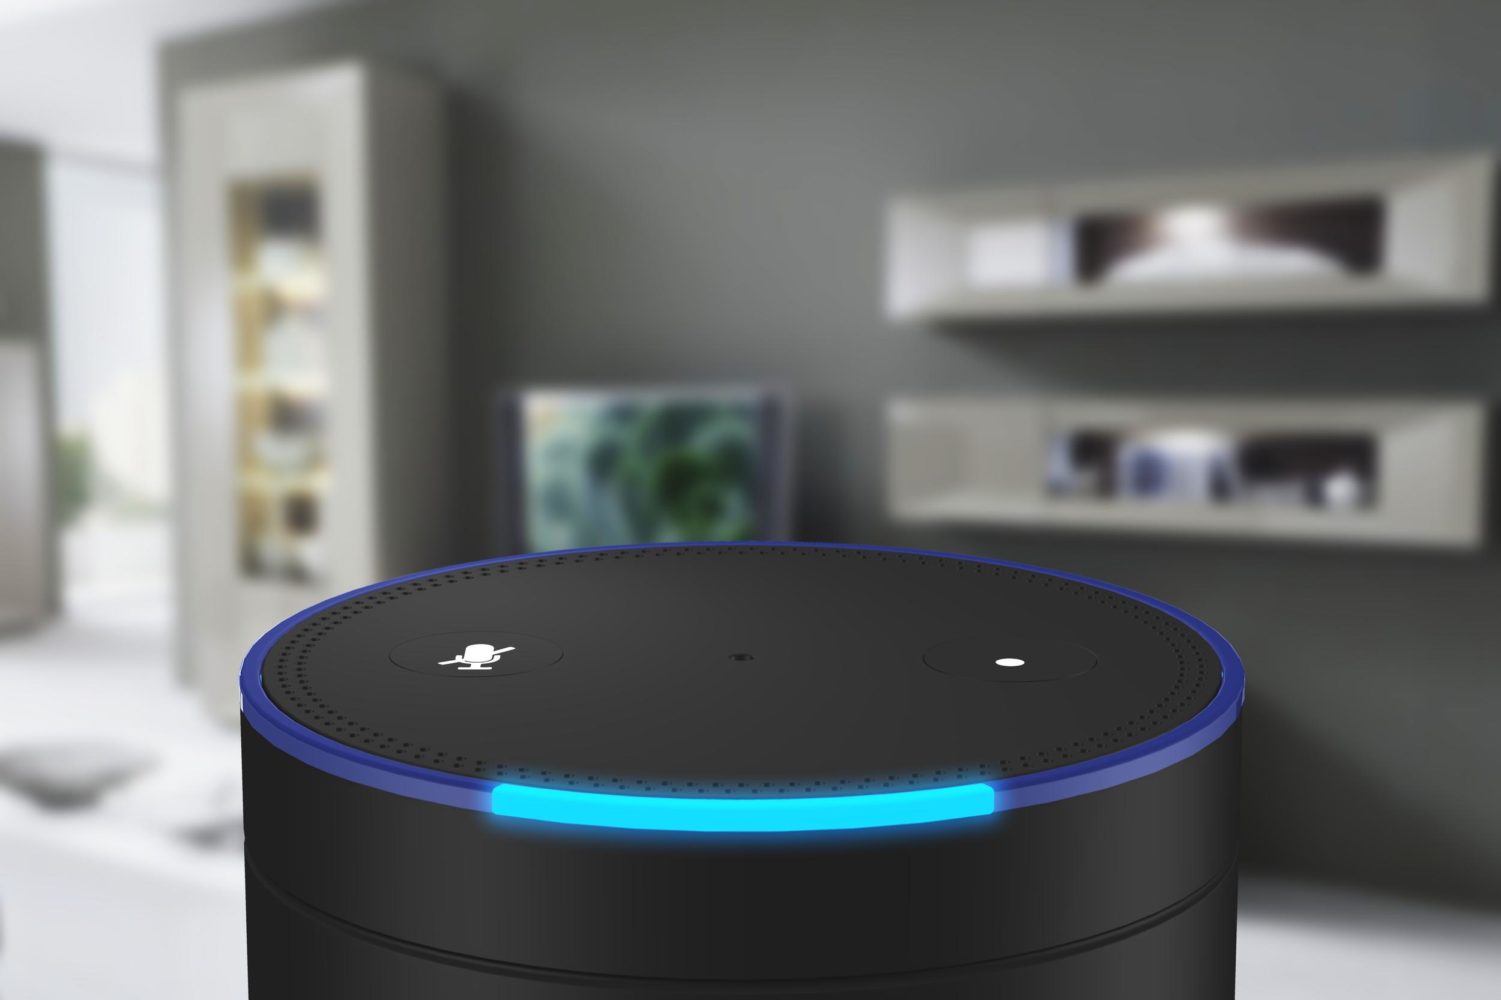 Amazon Promotes New Gadgets, Vision for Smart Homes Powered by Alexa